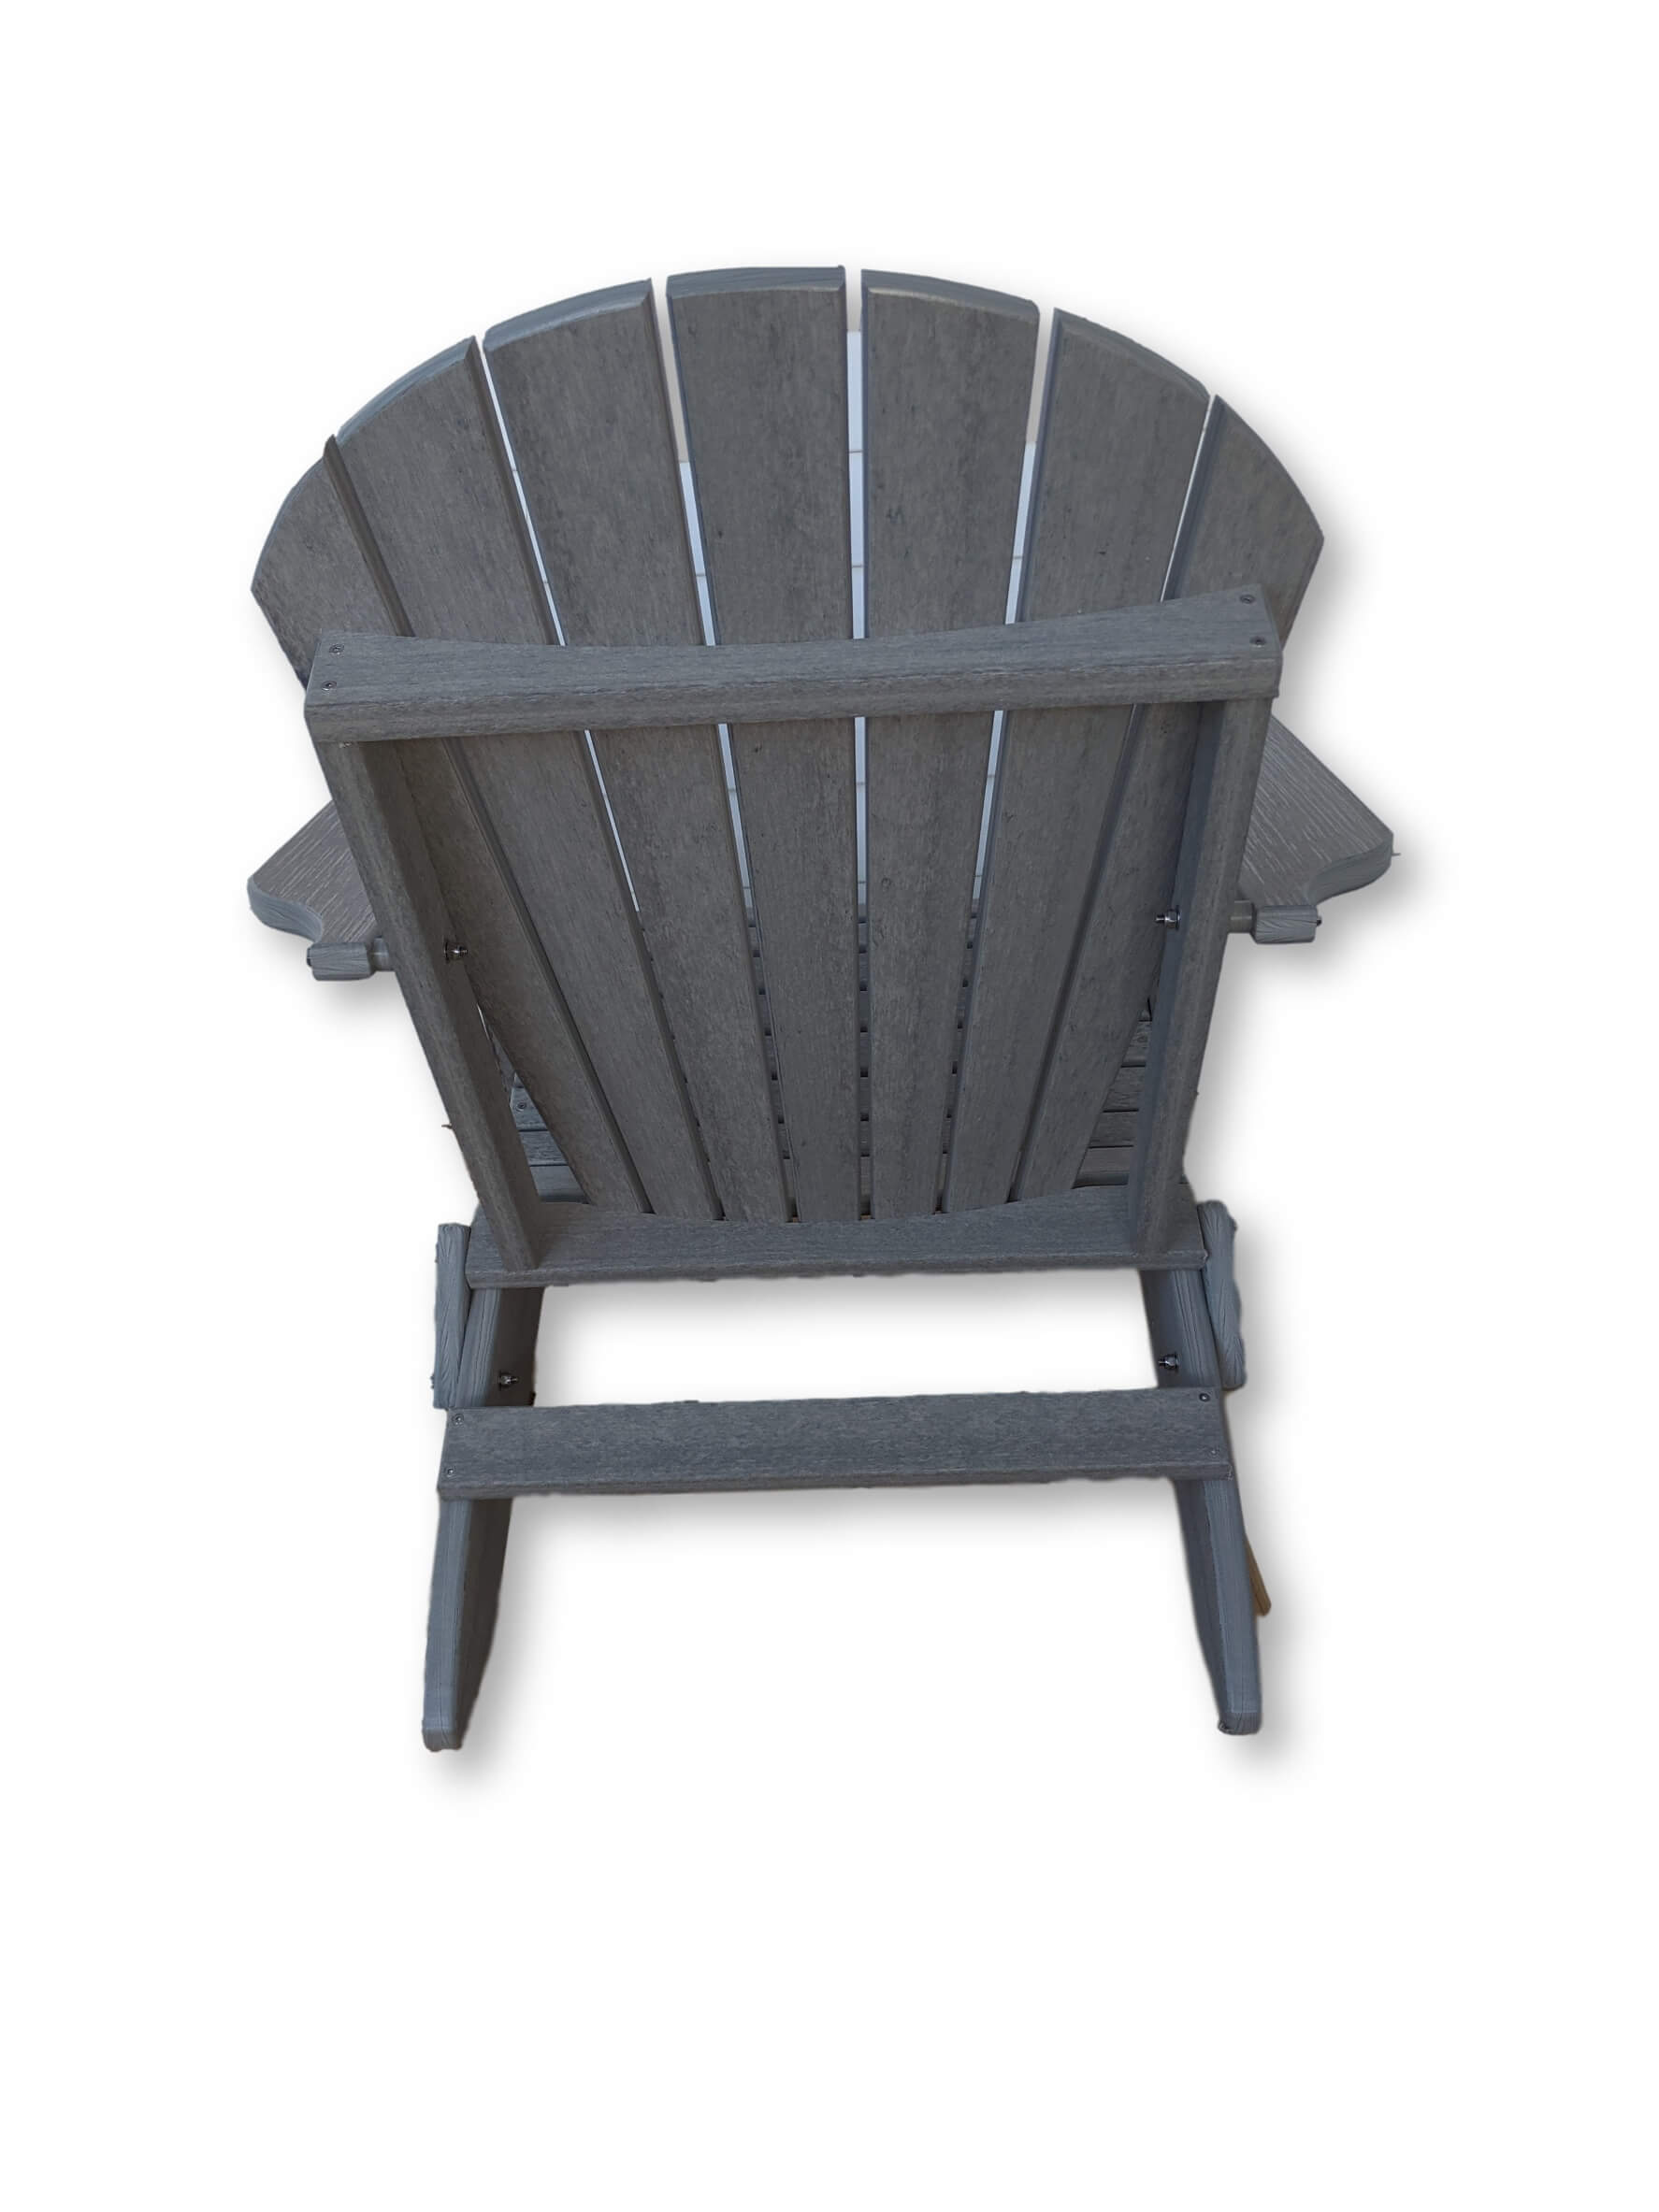 DriftWood Gray Folding Adirondack Chair(No Cup Holders)